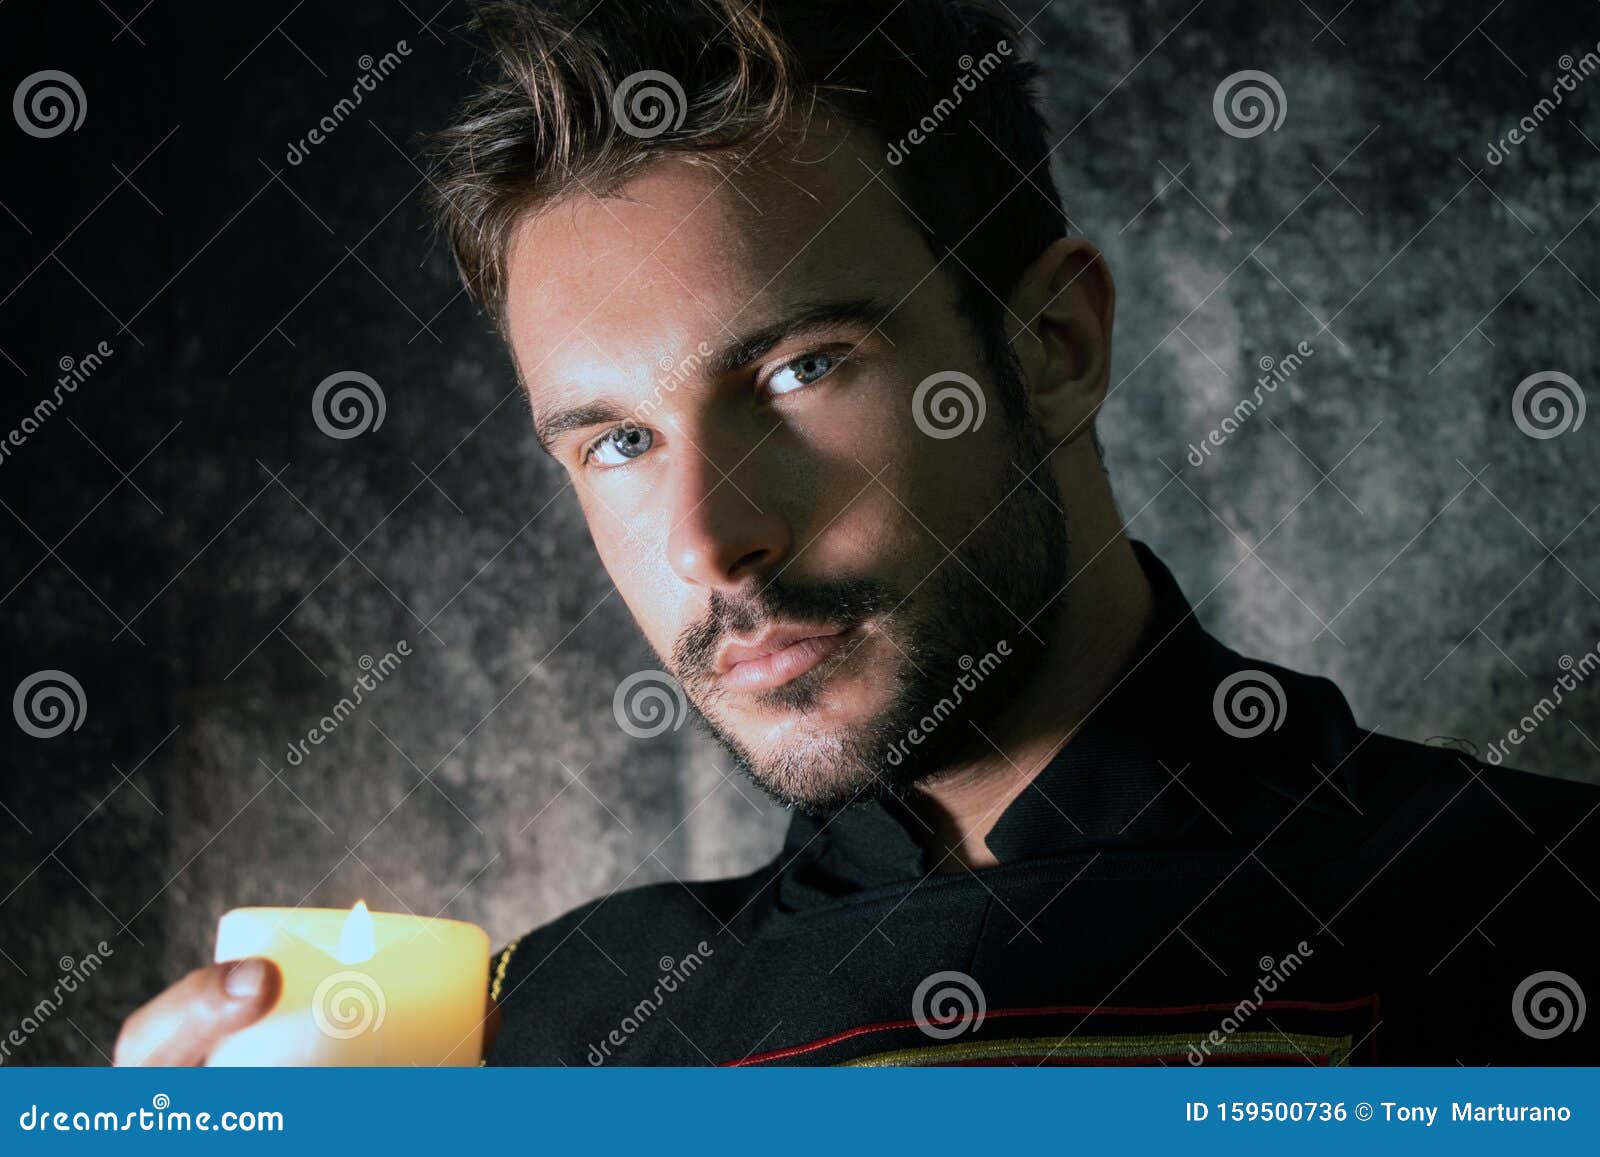 portrait of handsome medieval knight with beard and blue eyes, holding a candle and looking at camera